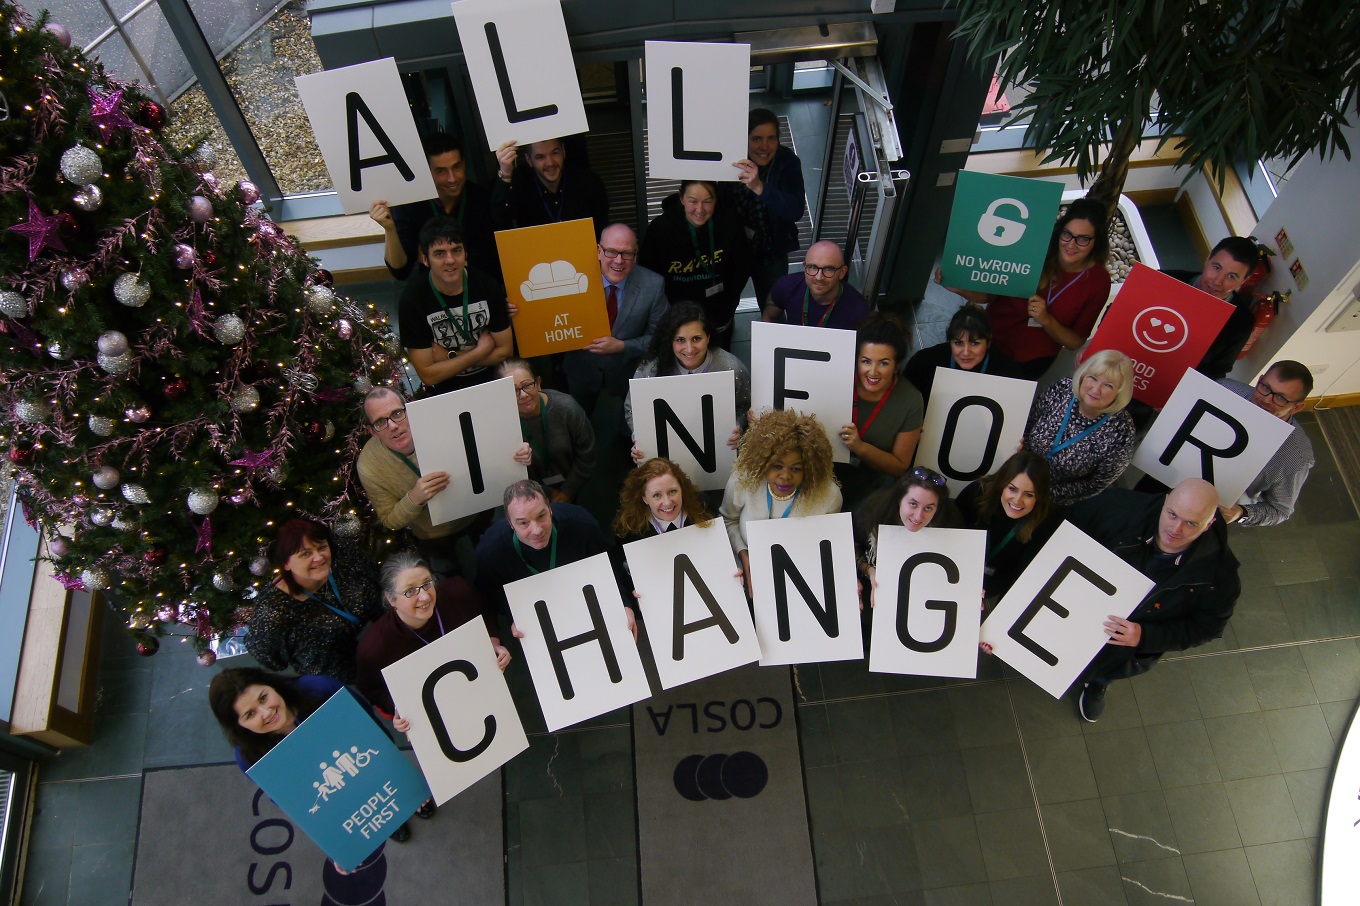 ‘All In For Change’ launch heralds new approach to tackling homelessness in Scotland